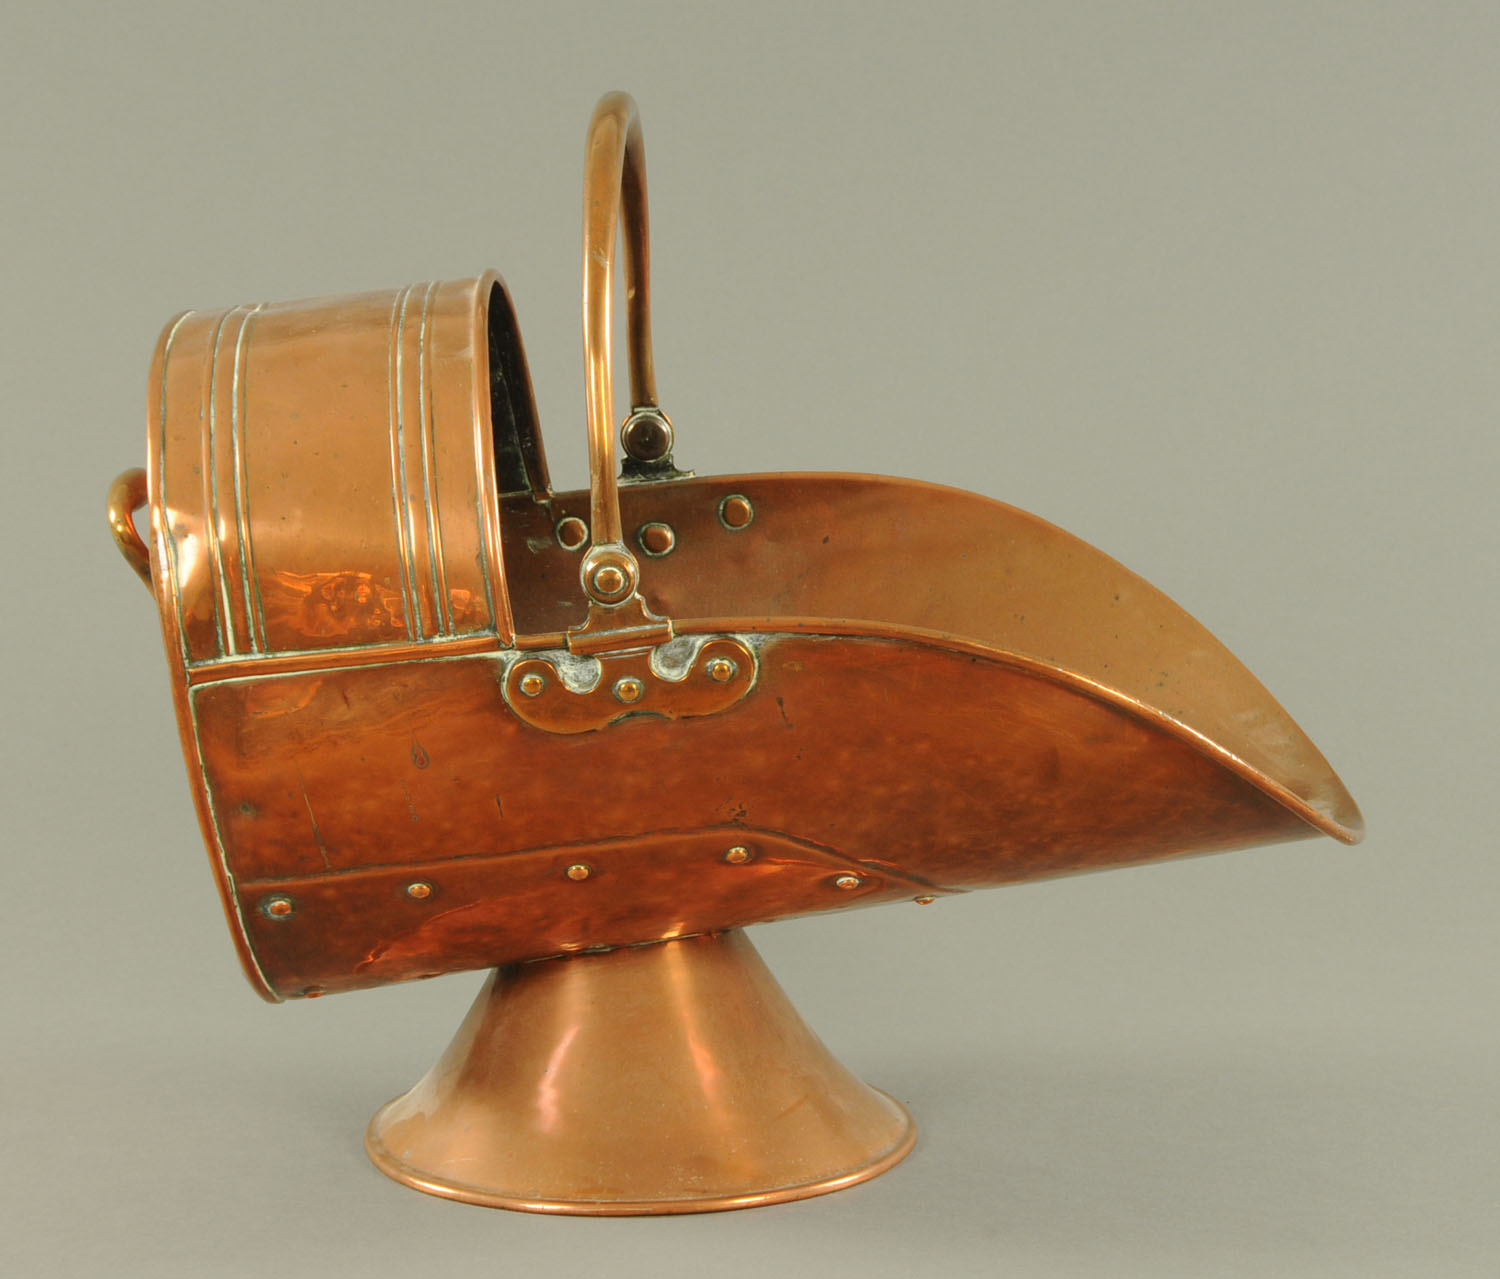 A copper coal scuttle, 19th century, with bale handle and supported upon a circular foot.